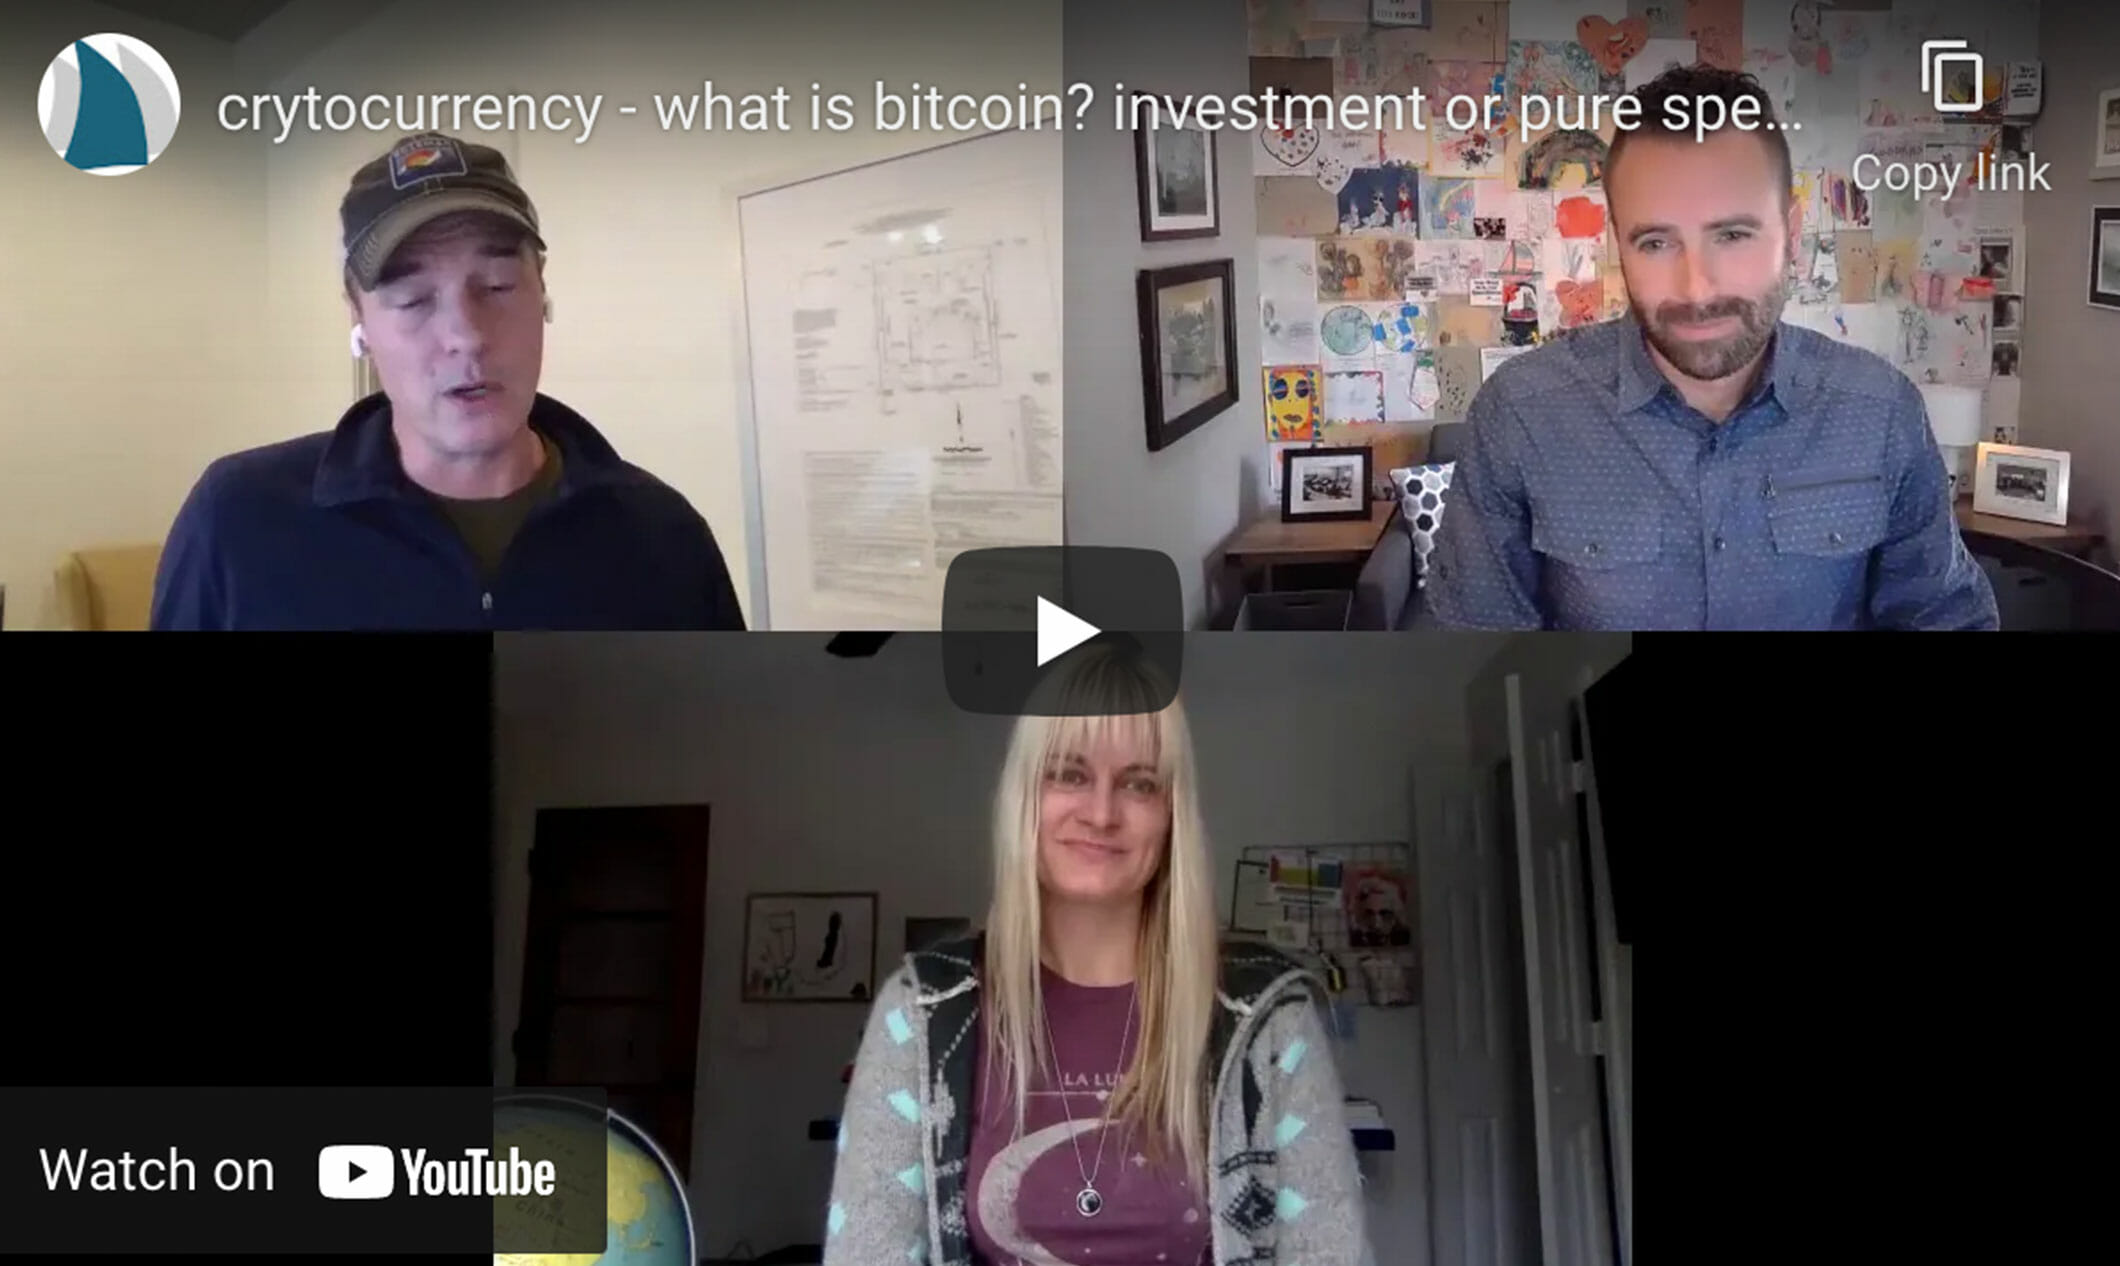 Cryptocurrency: Bitcoin – Investment or pure speculation?